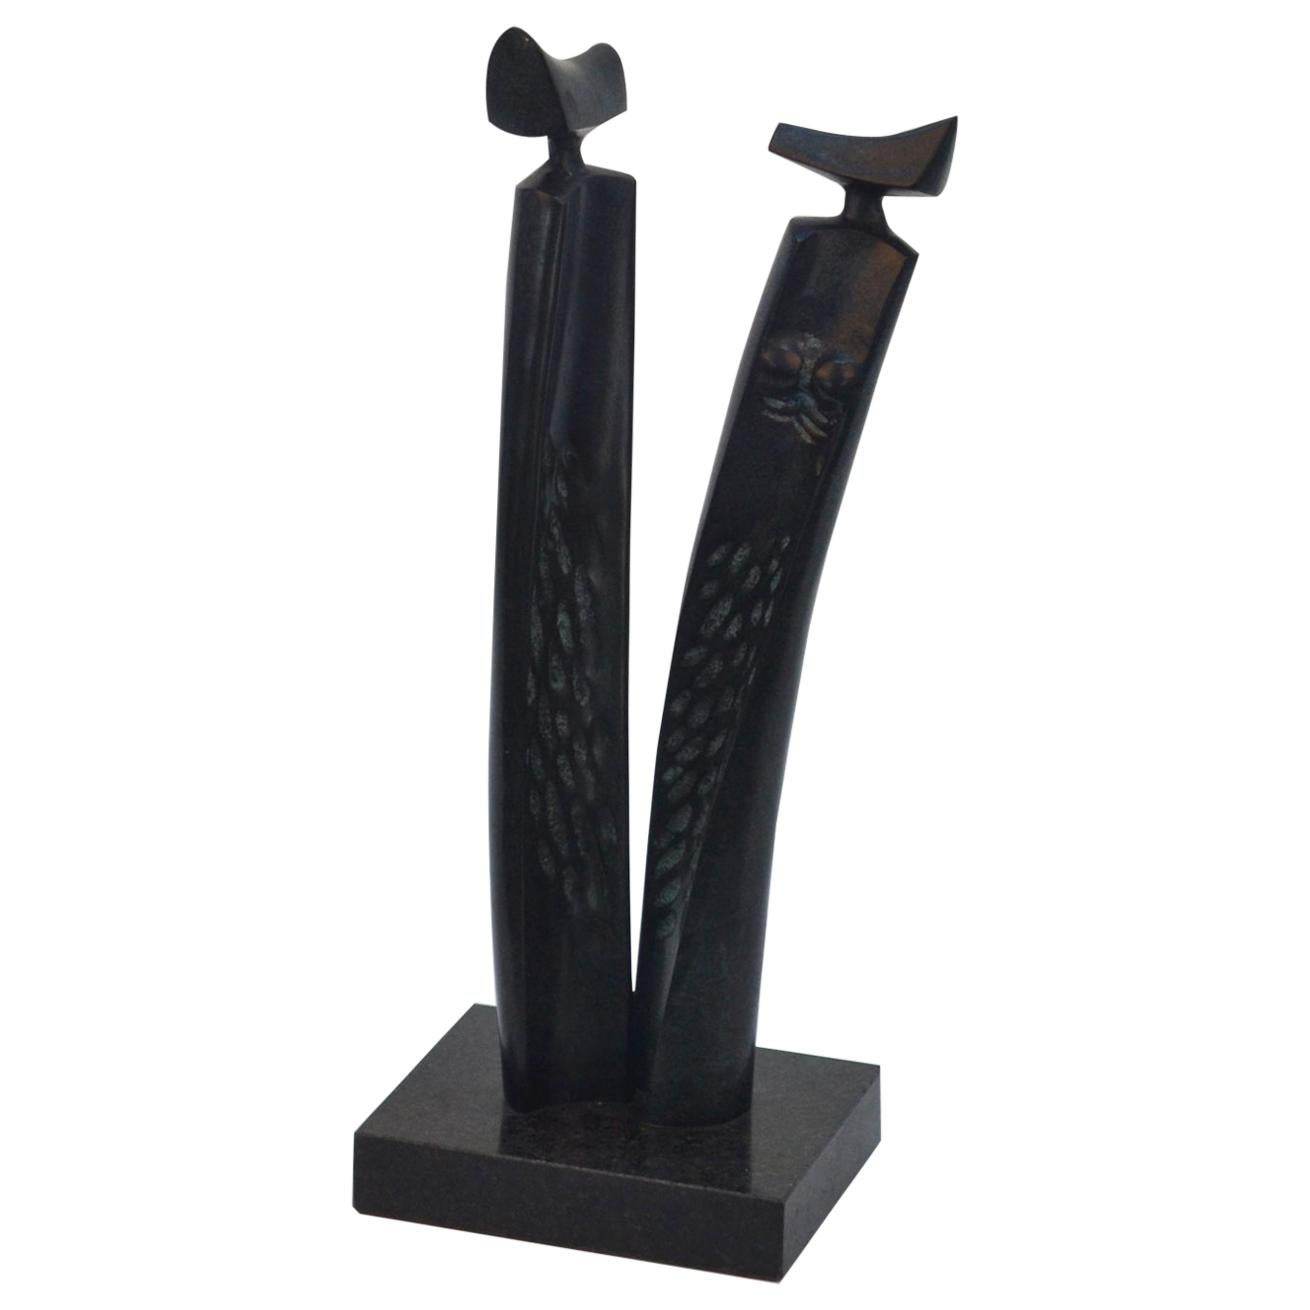 Bronze Sculpture of Elongated Male and Female on Marble Plinth